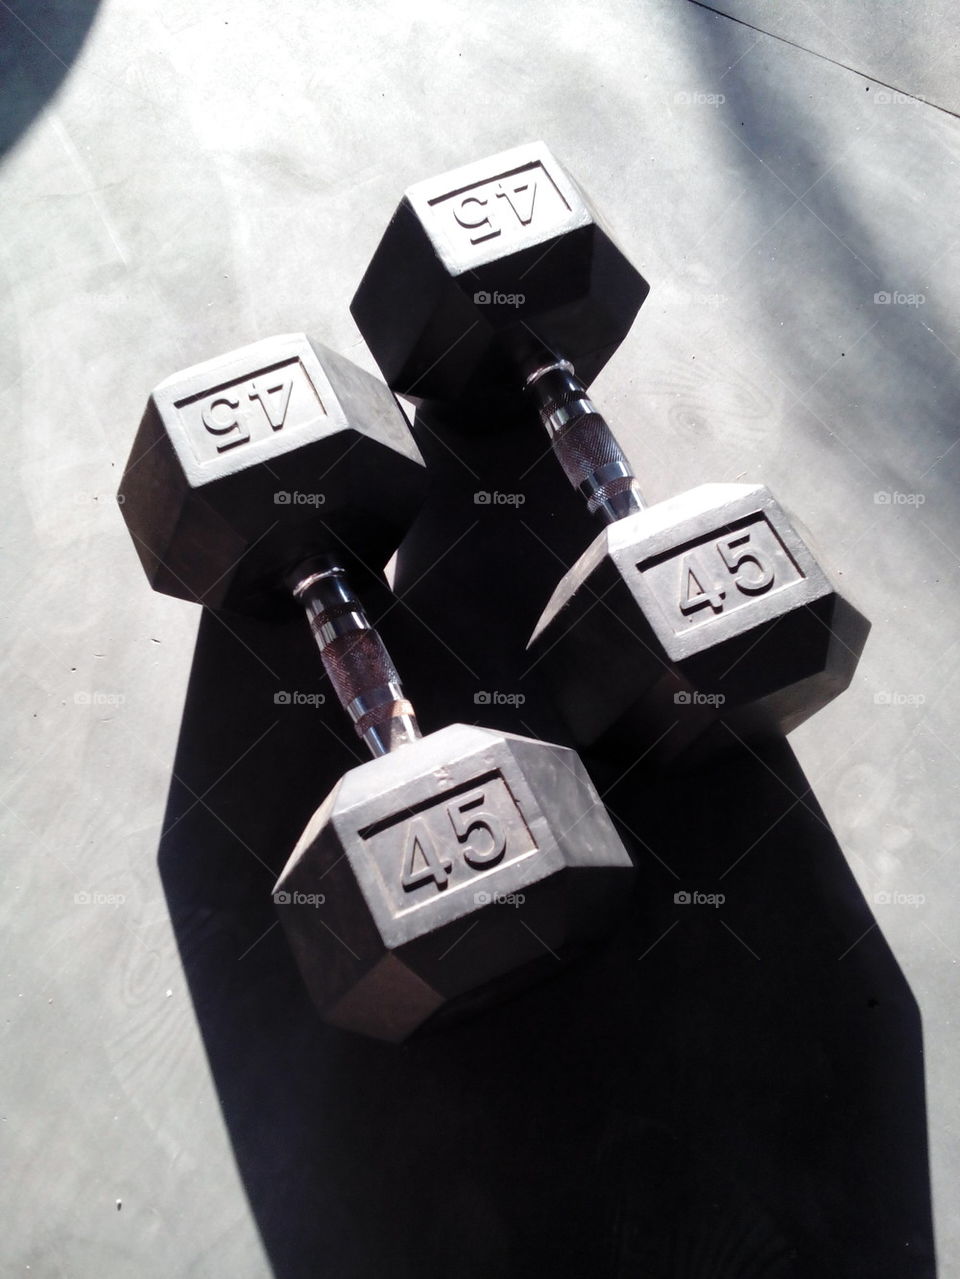 Dumbell 45. ready for some workout?